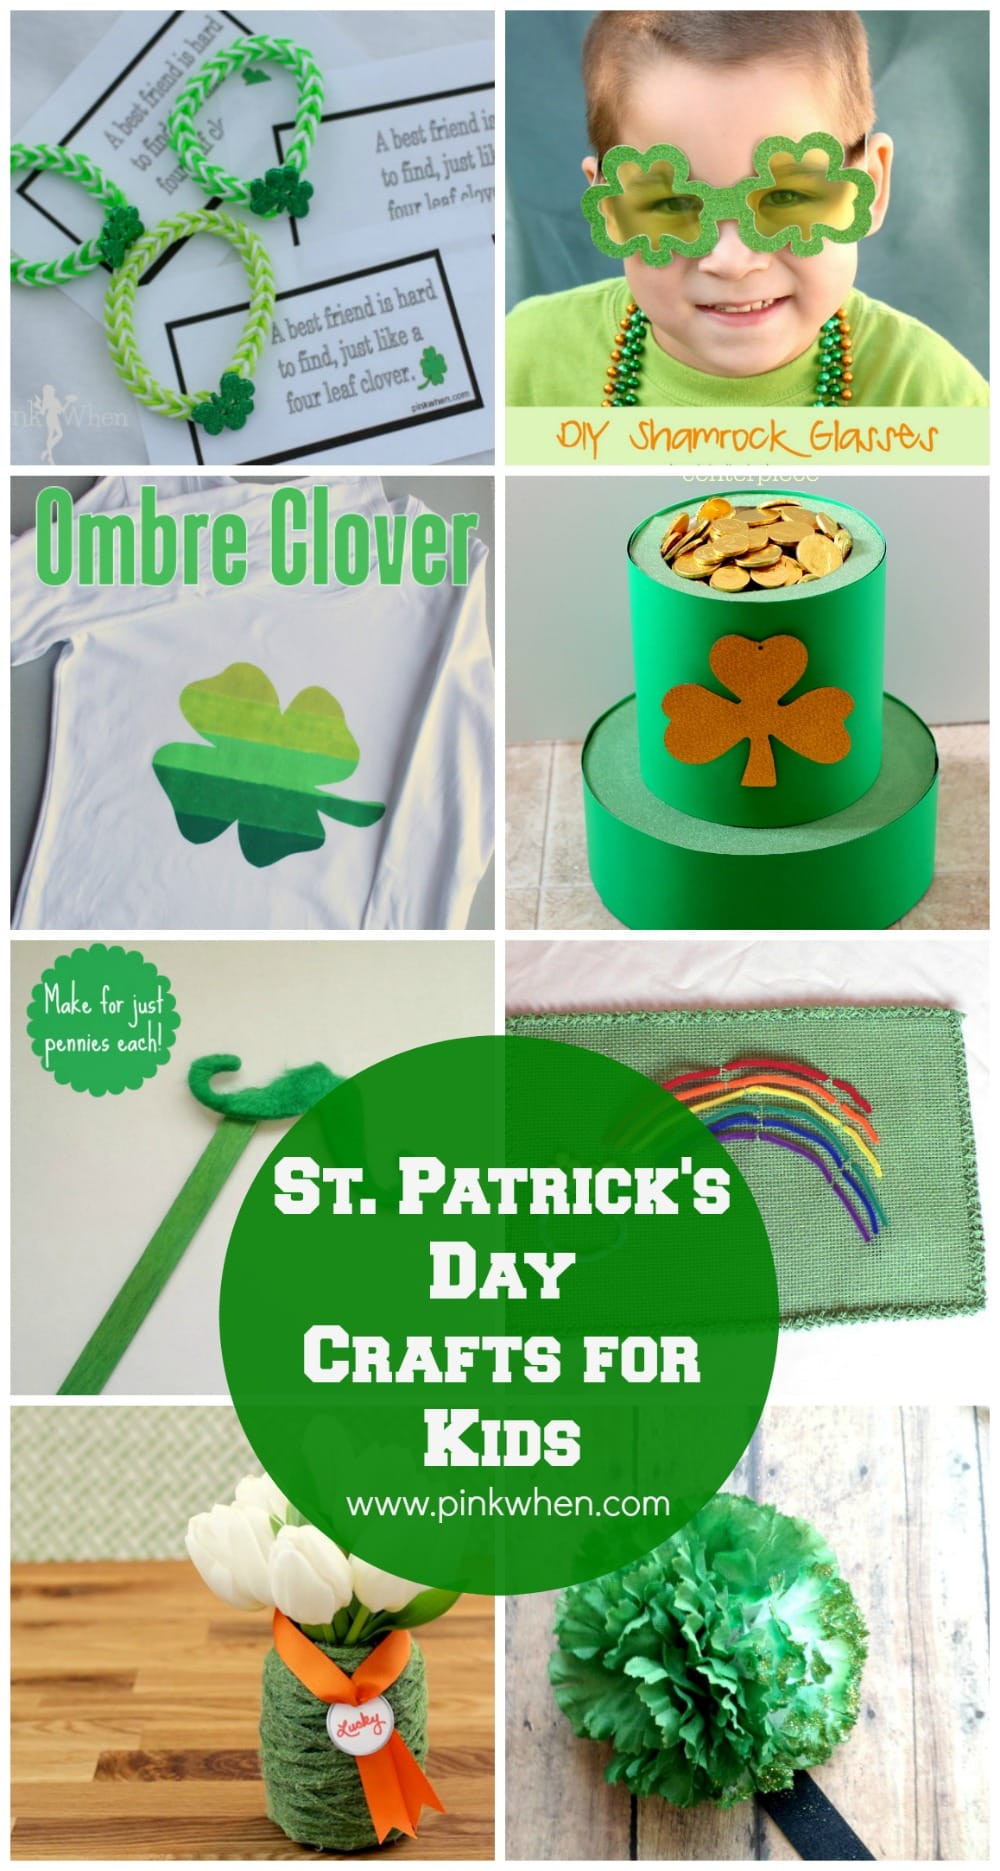 St Patrick's Day Toddler Crafts
 10 St Patrick s Day Crafts for Kids PinkWhen